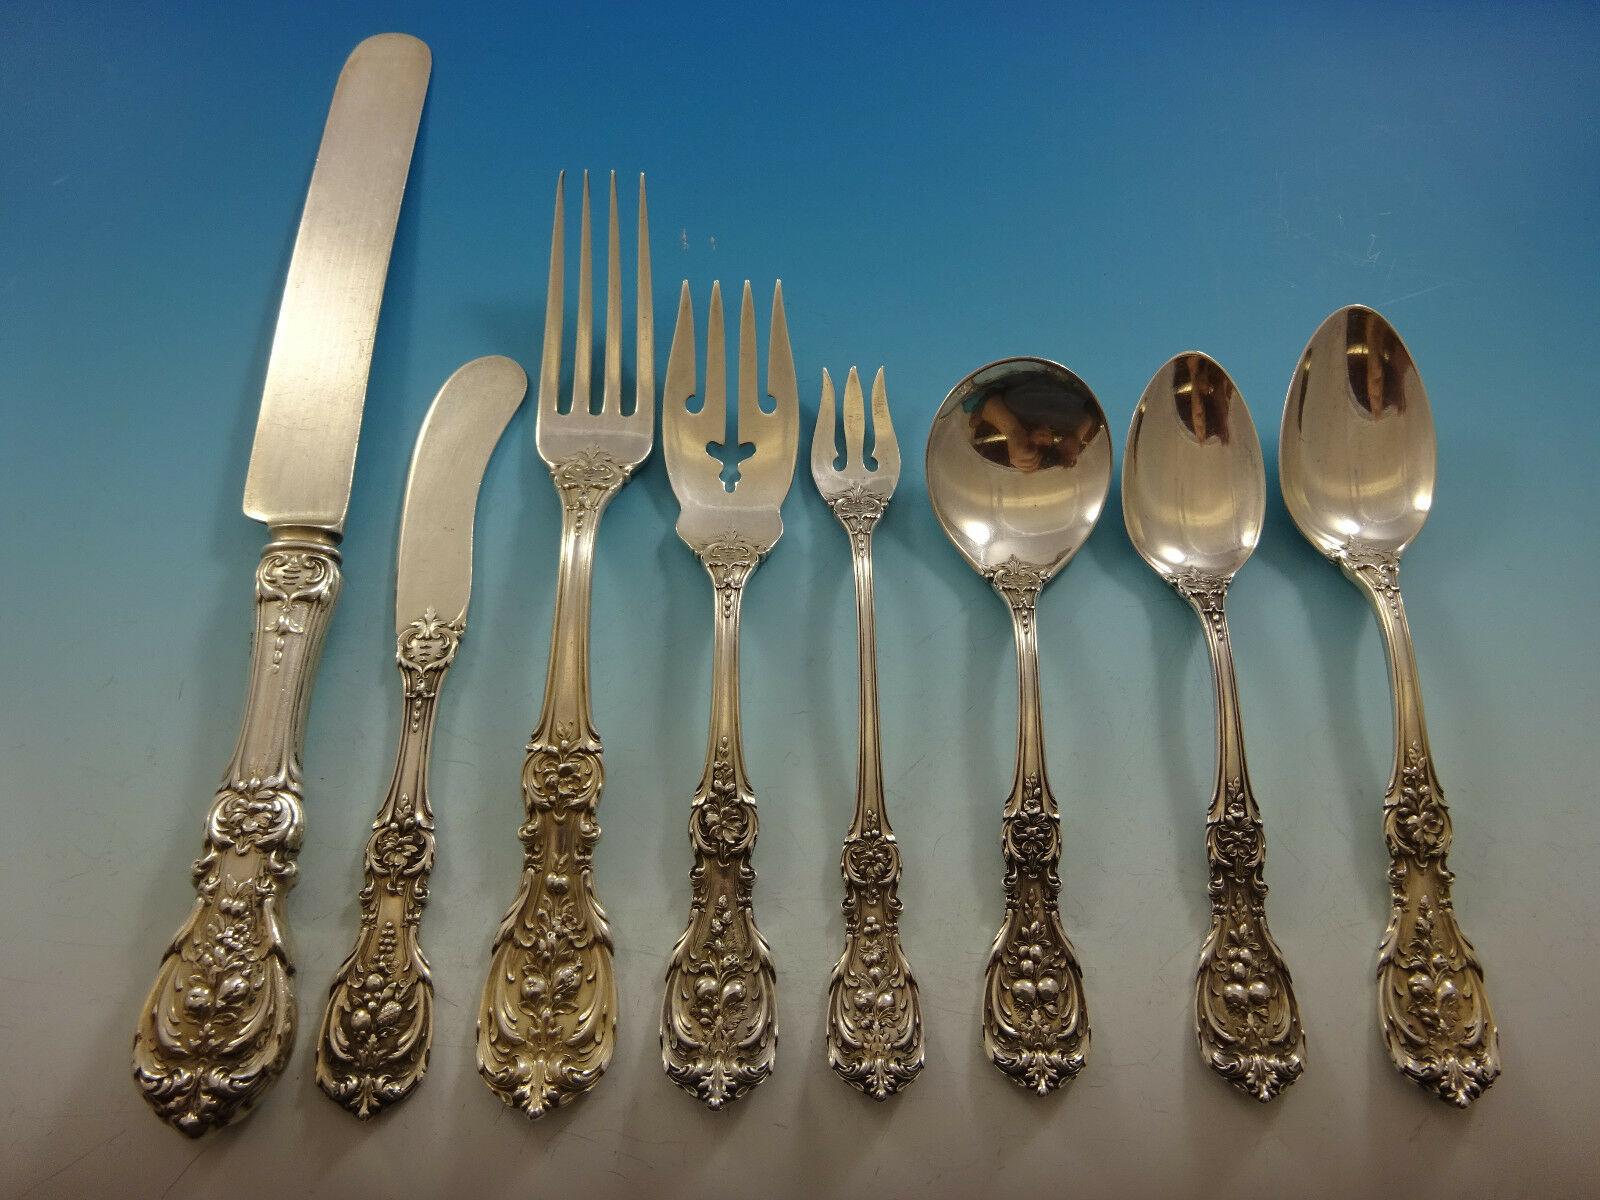 Exceptional Old Francis I by Reed & Barton sterling silver flatware set - 89 pieces. This set has fabulous crisp detailing and includes:

10 knives with blunt silver plated blades, 9 1/4